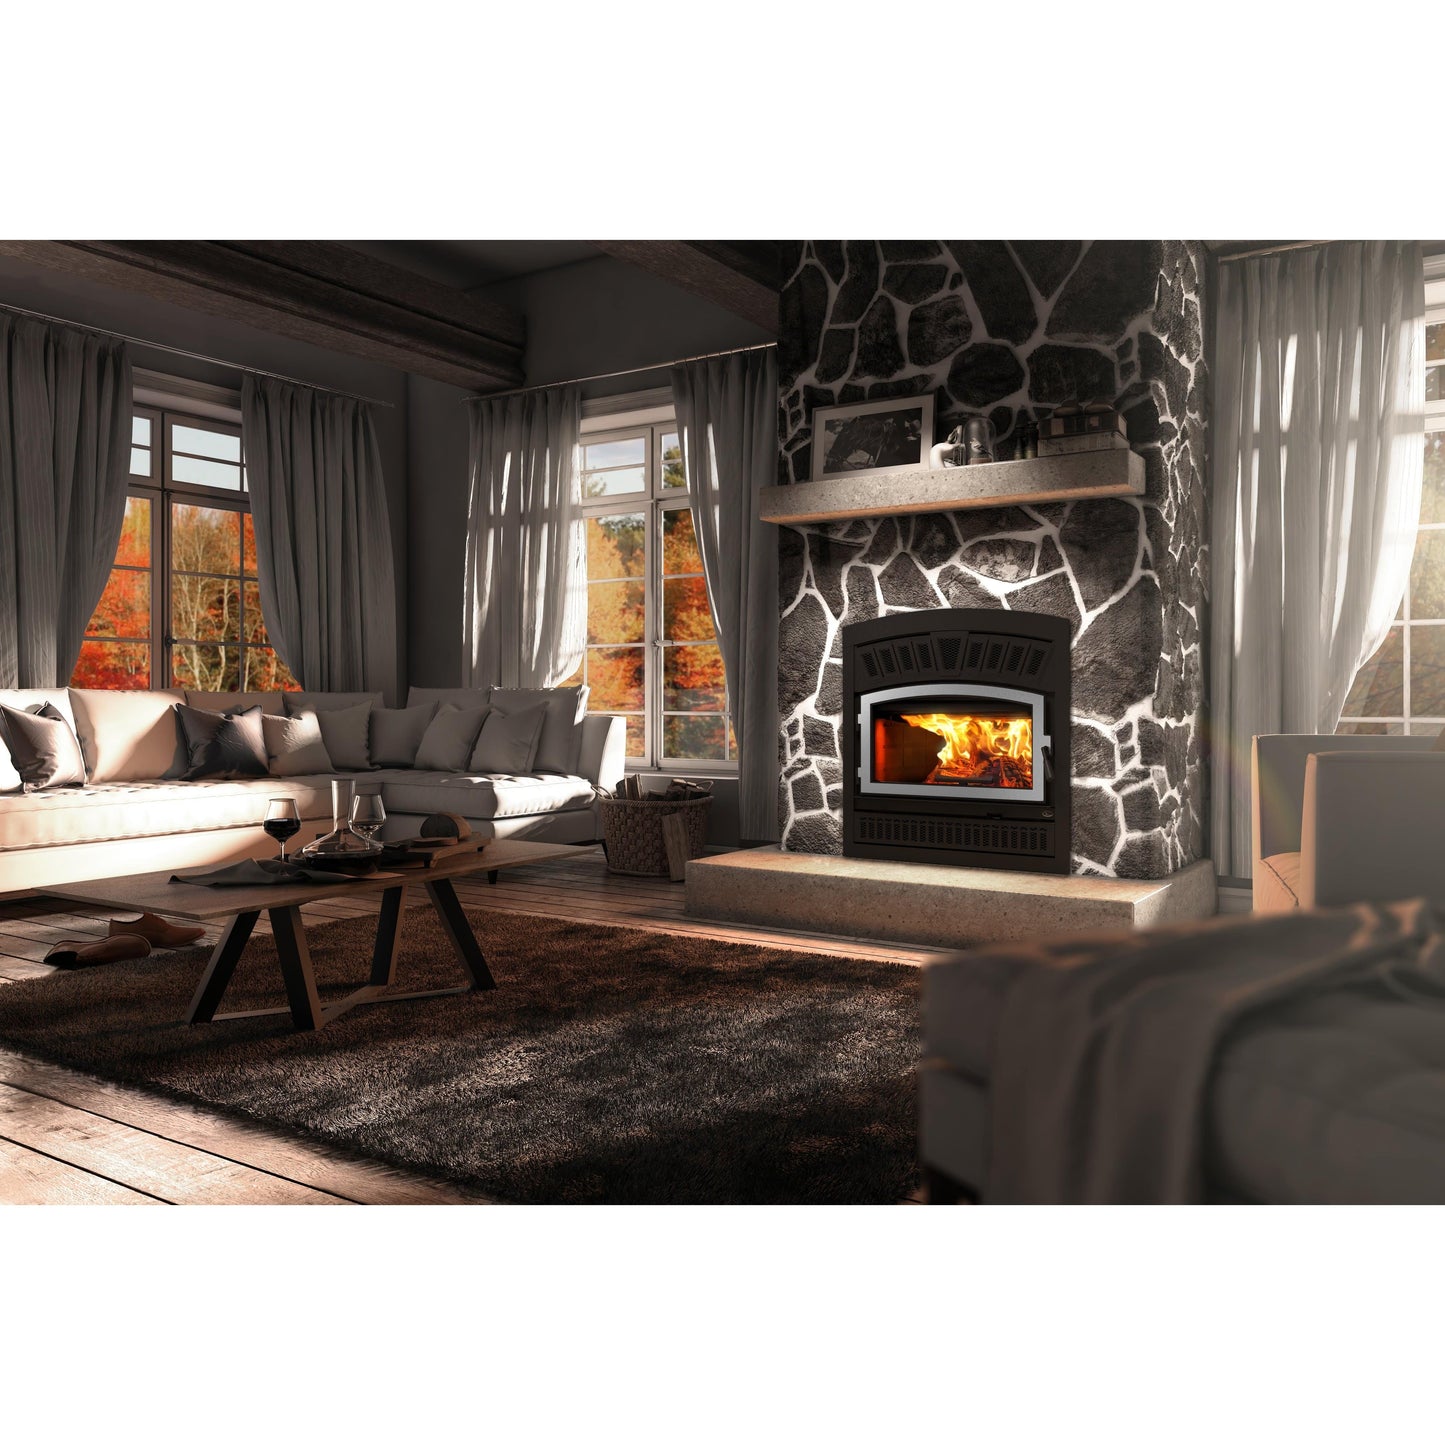 Valcourt Lafayette II High-Efficiency Controlled Combustion Fireplace